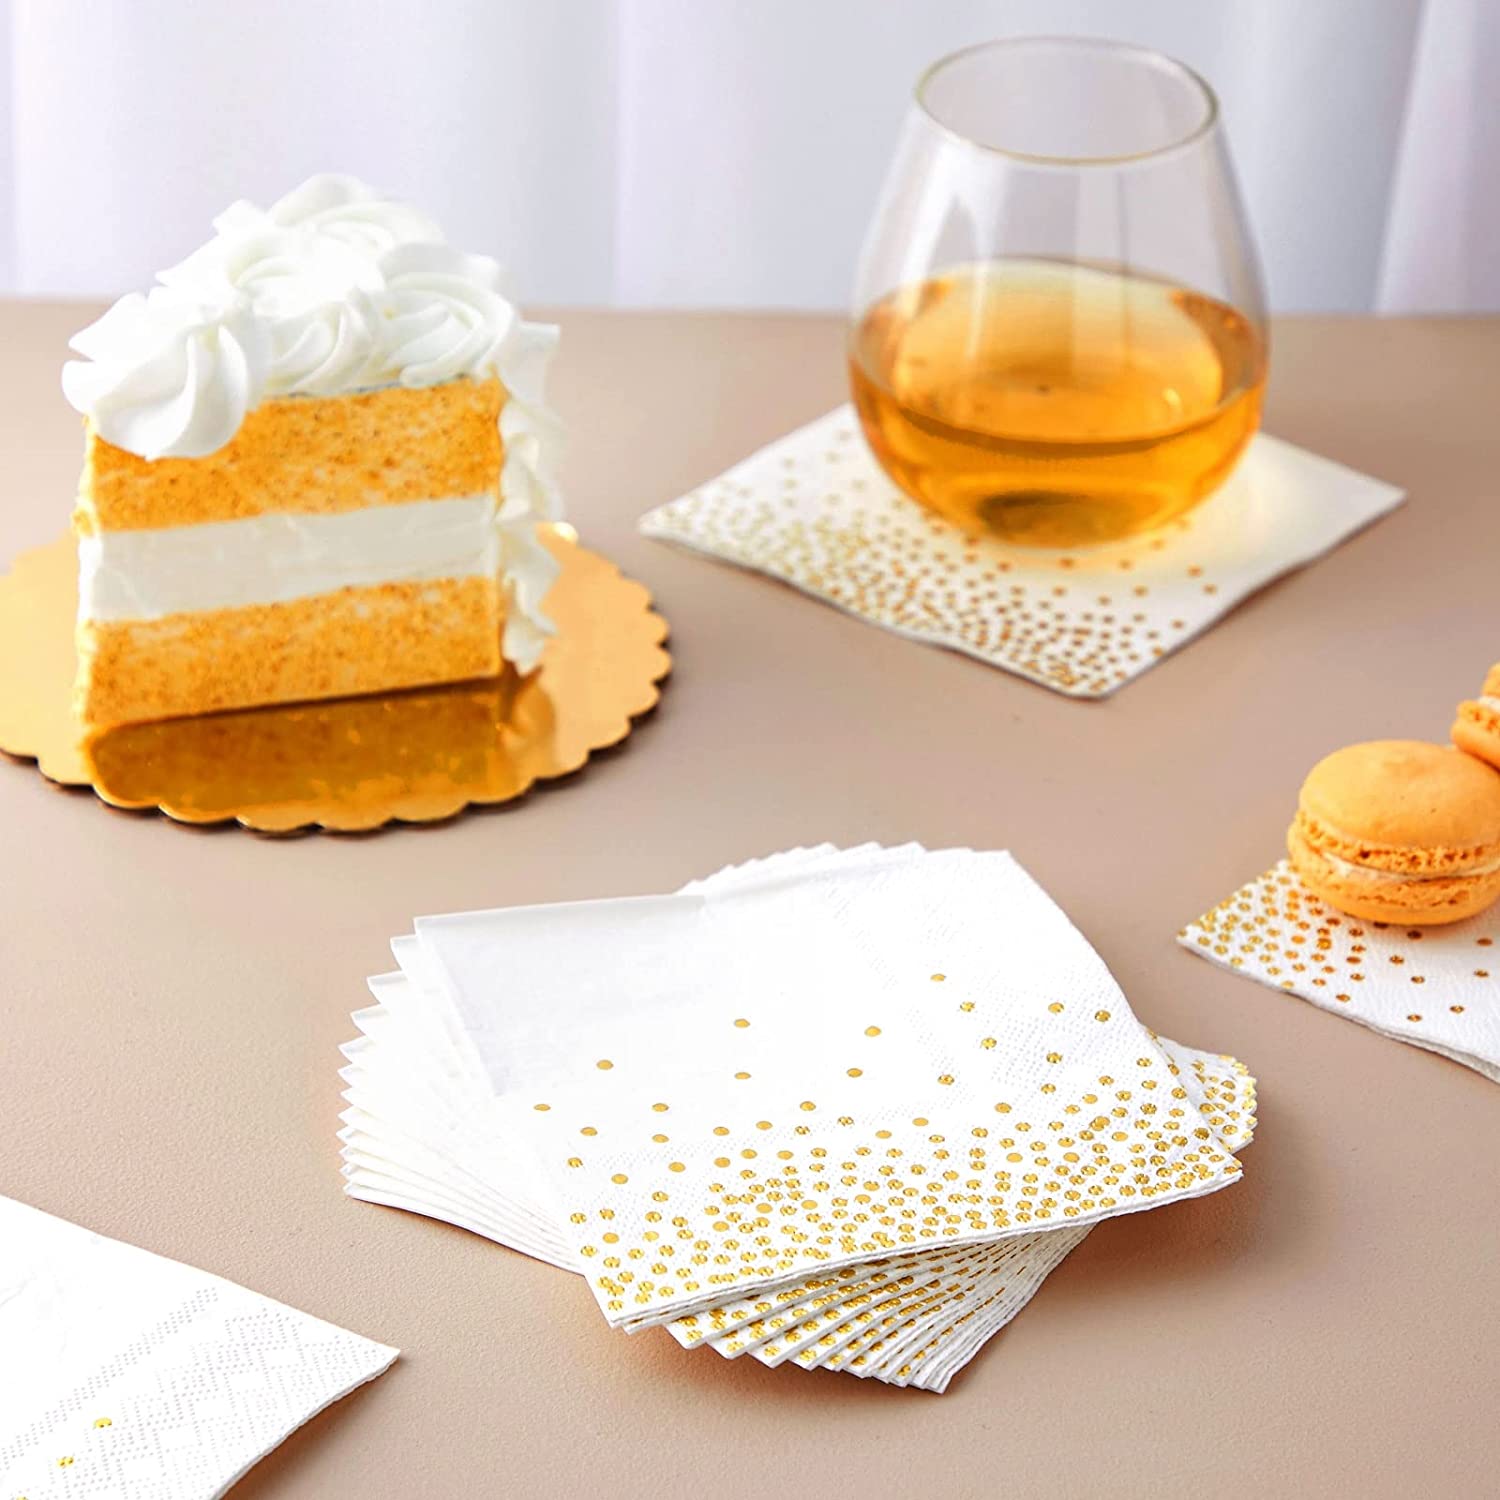 100 PK Gold Napkins - 4 Assorted Designs - 3-Ply Cocktail Napkins Folded 5 x 5 Inches Bar Napkins Disposable Party Napkins